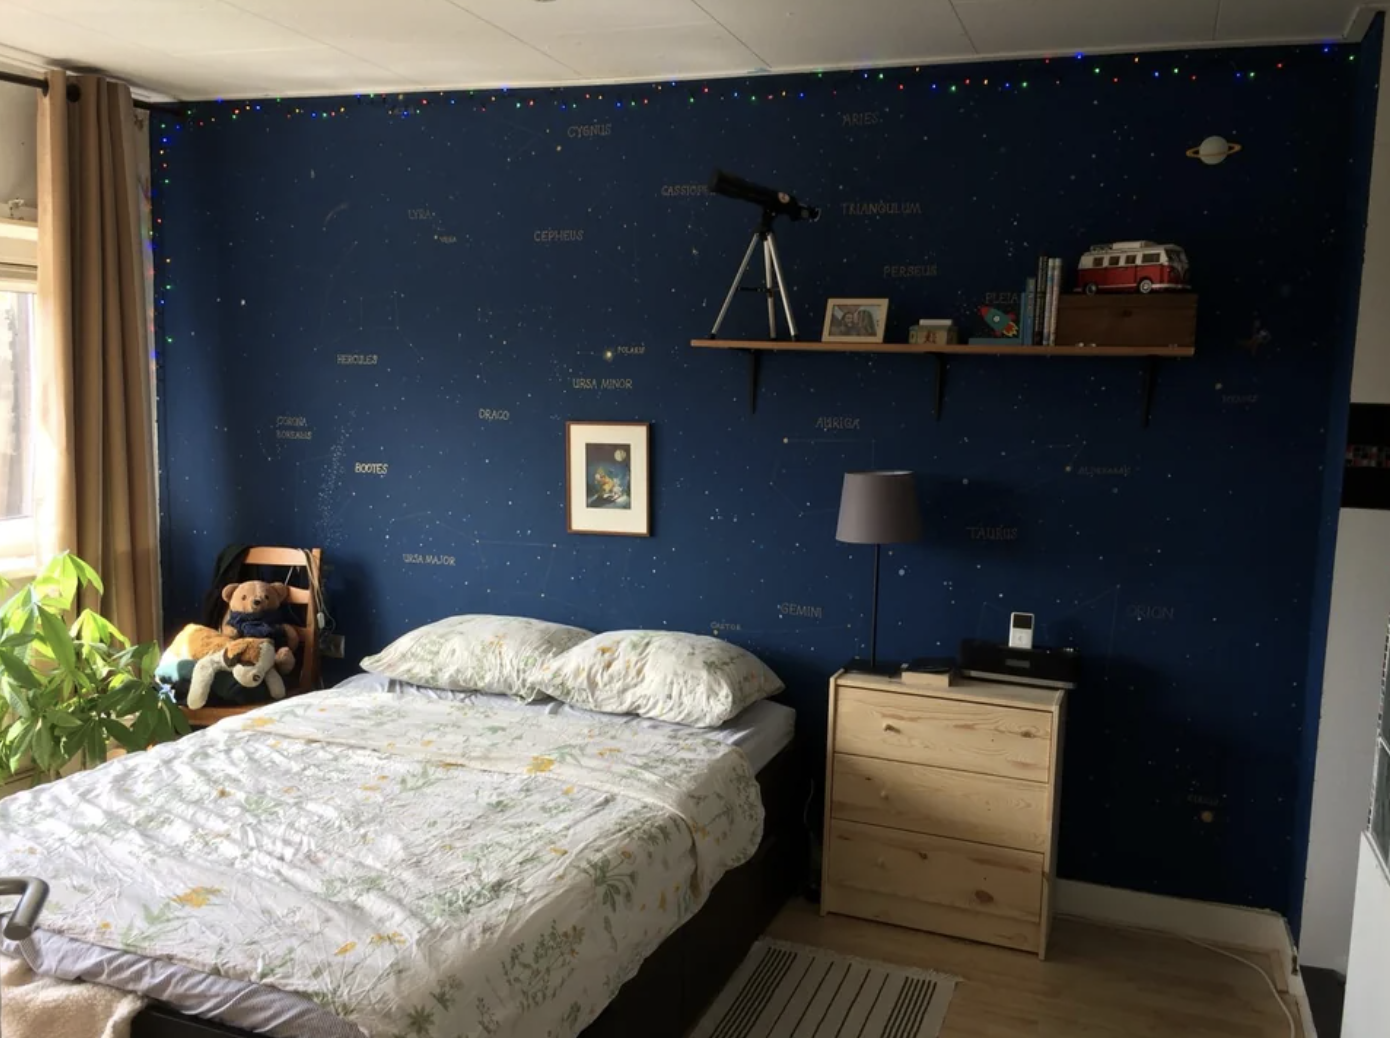 The main focus of this space-themed room is the constellation wall